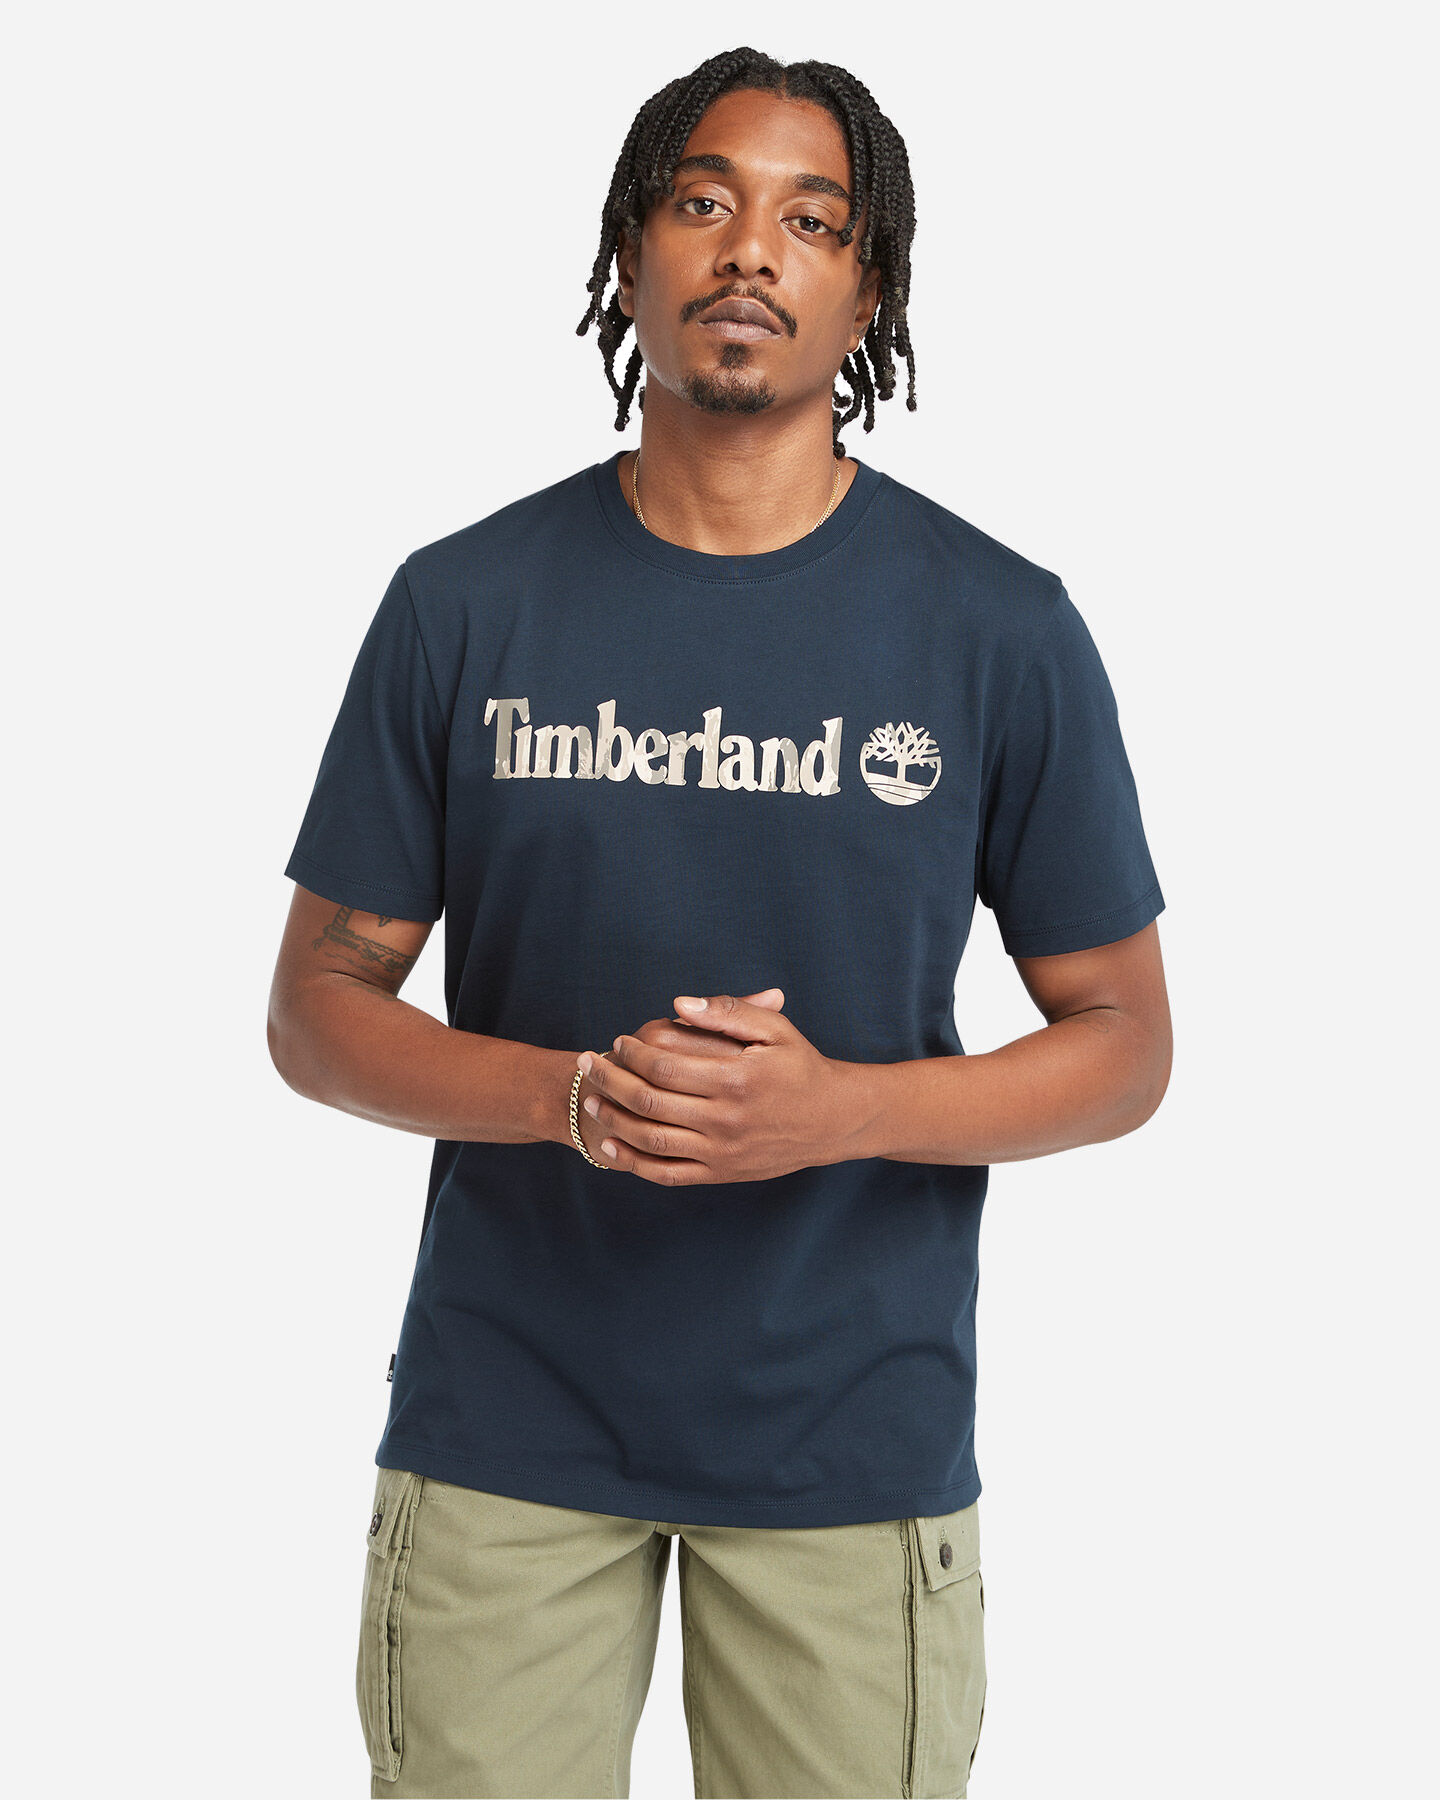  T-Shirt TIMBERLAND LINEAR LOGO M S4131479|4331|S scatto 1